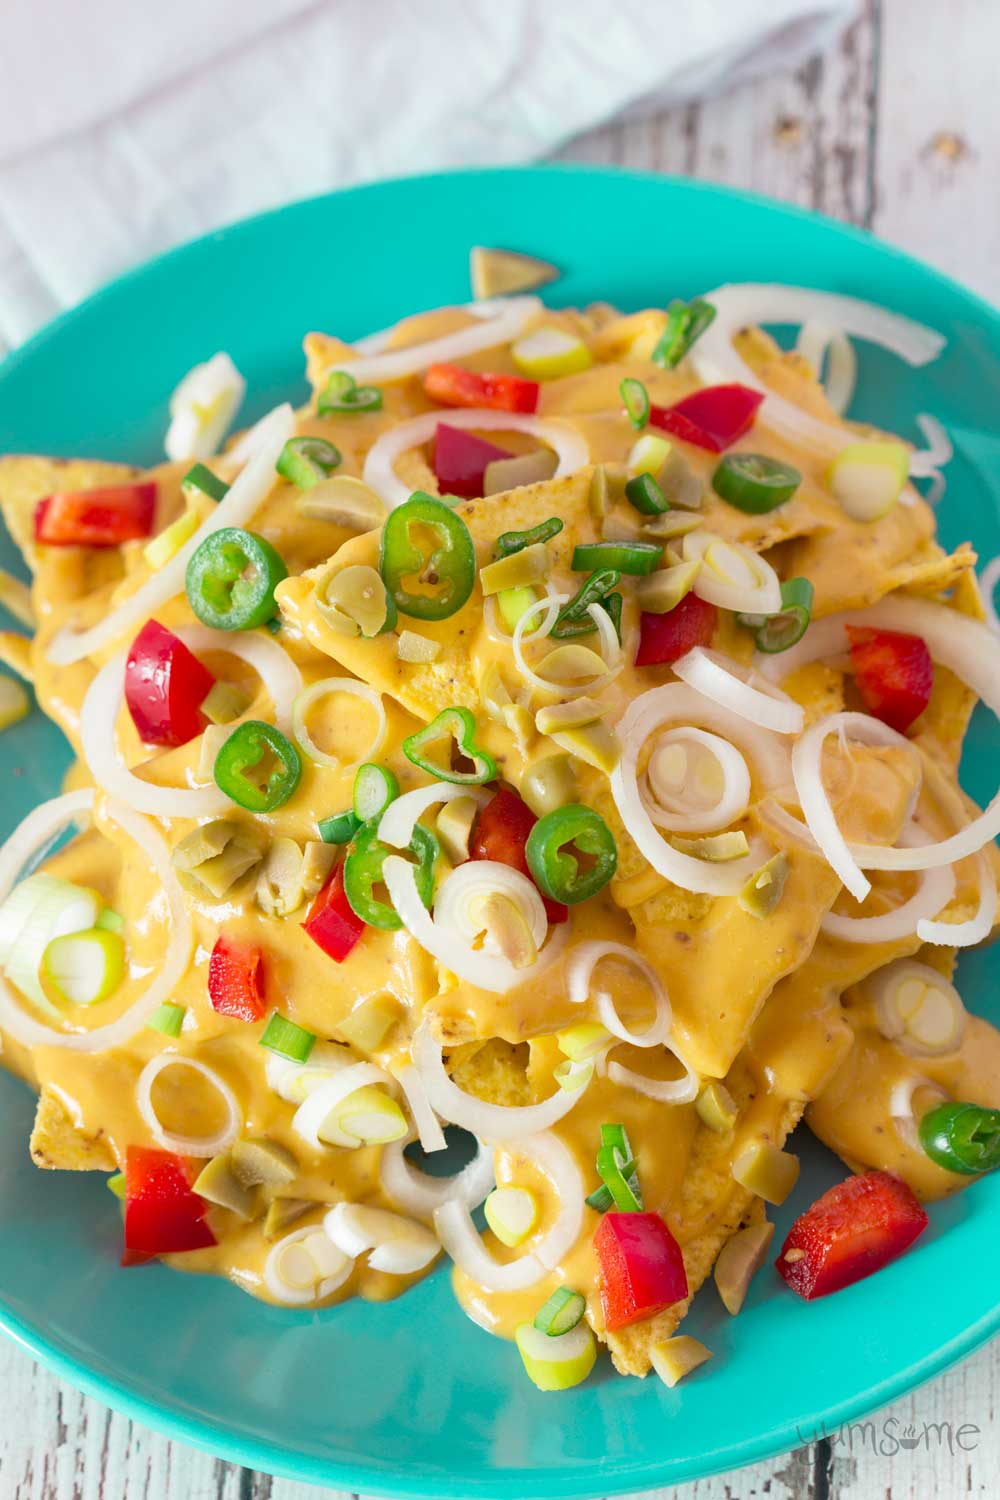 Made with just a handful of staple ingredients, my vegan nacho cheese is creamy and cheesy, with a little bit of a spicy kick. | yumsome.com